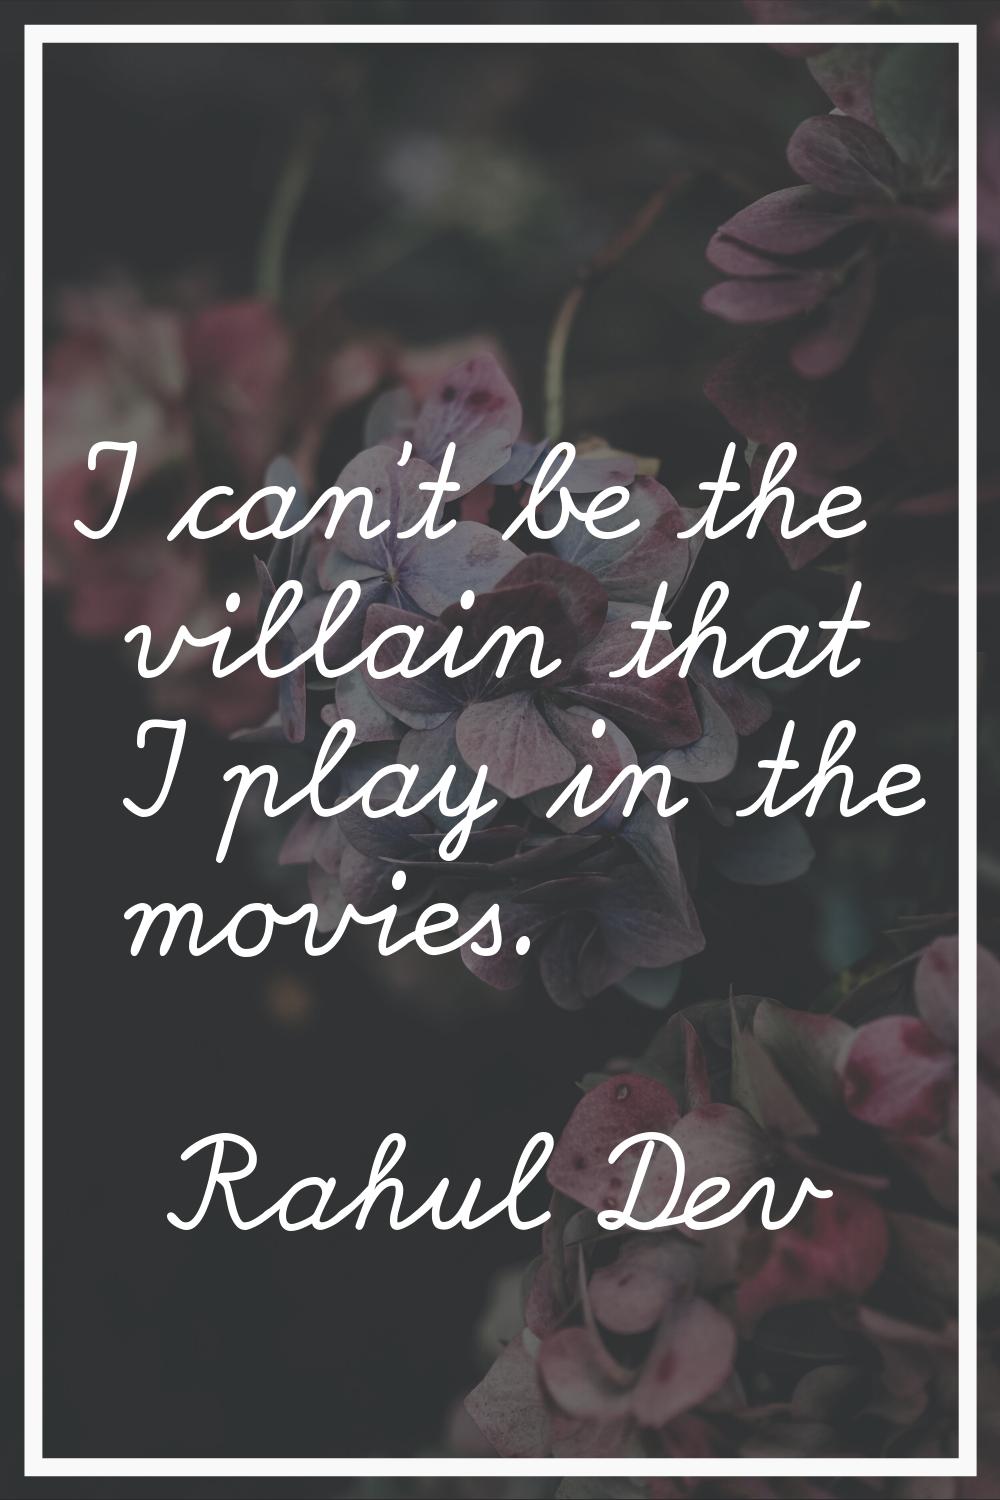 I can't be the villain that I play in the movies.